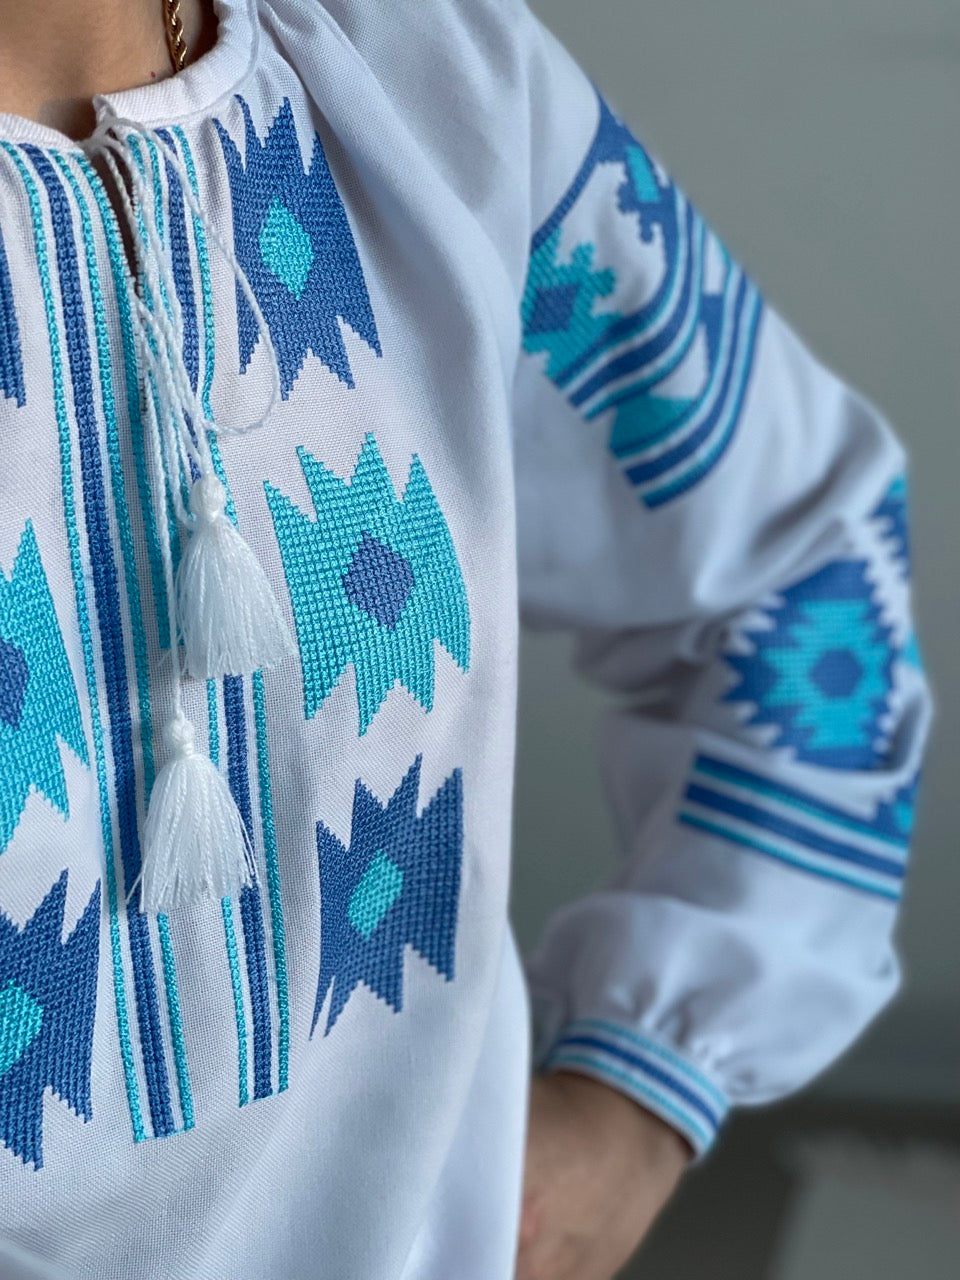 The White Women's Blouse with Blue Embroidery